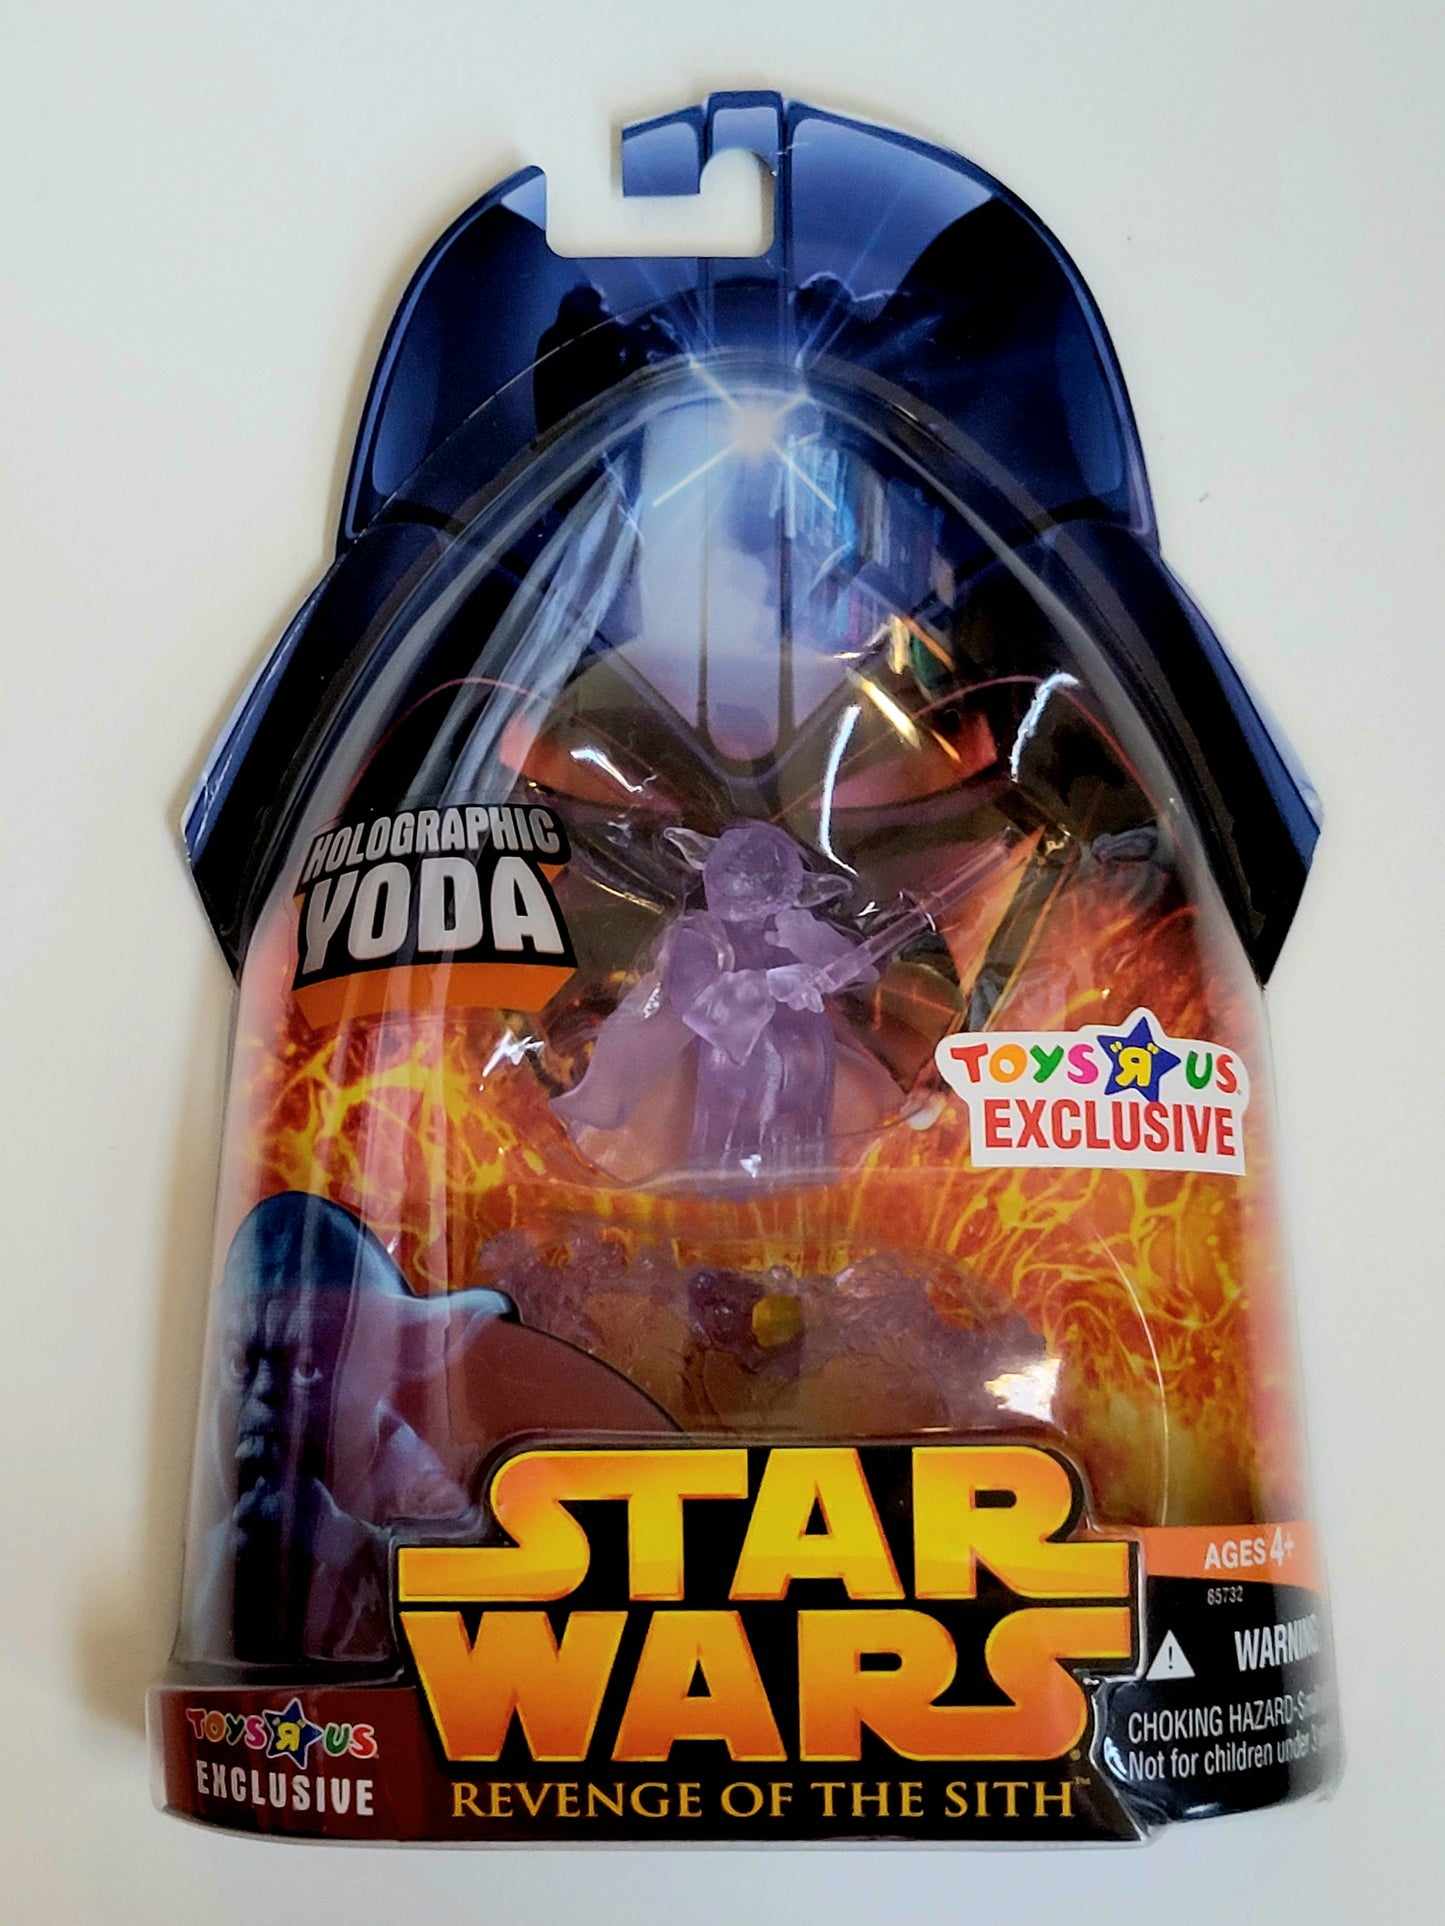 Star Wars: Revenge of the Sith Holographic Yoda Exclusive 3.75-Inch Scale Action Figure